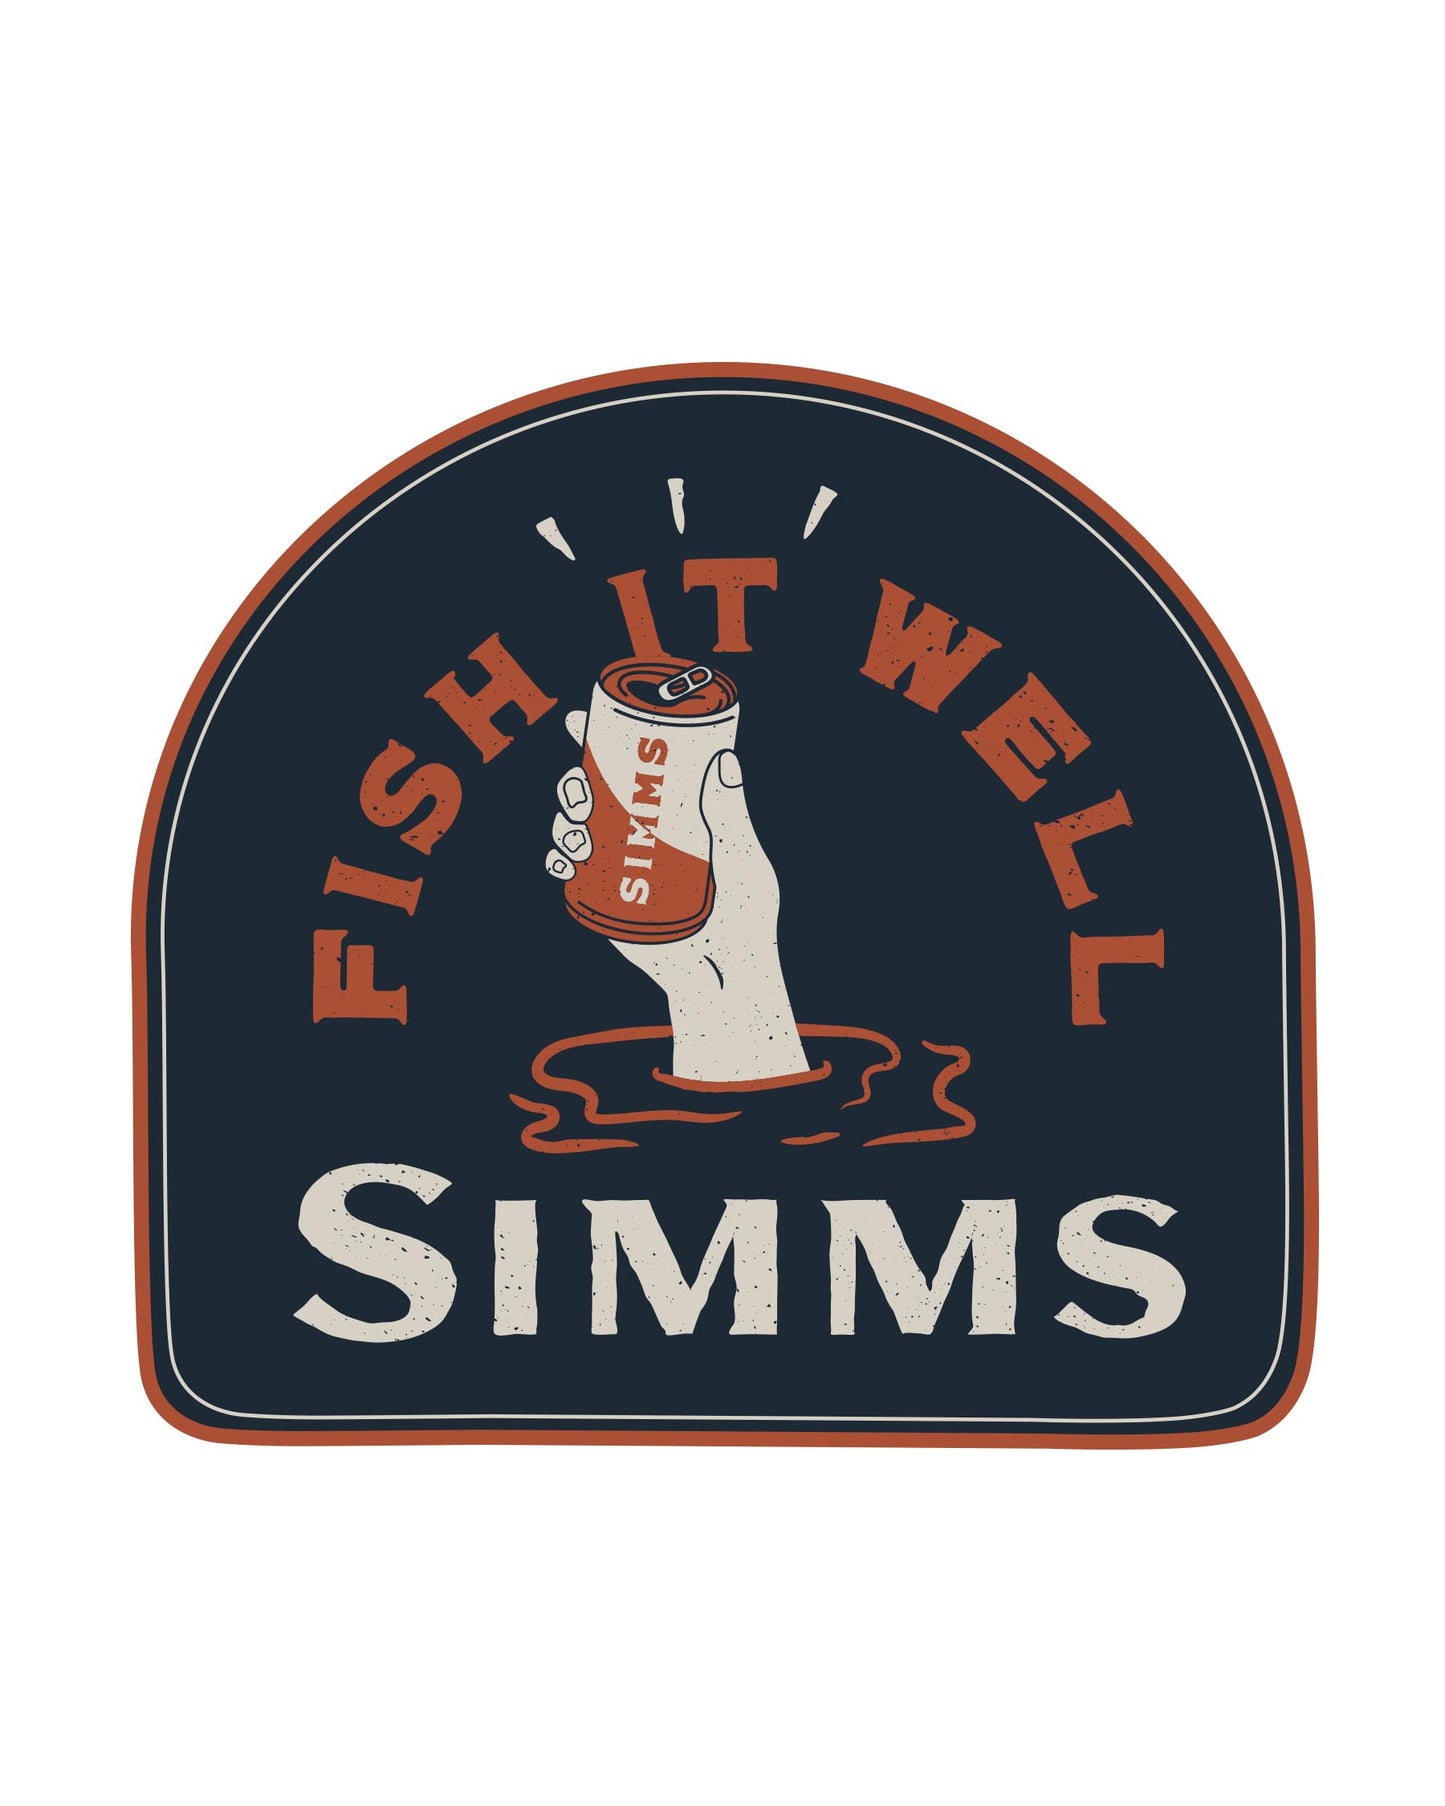 Simms FIW Beer Sticker  Simms Fishing Products